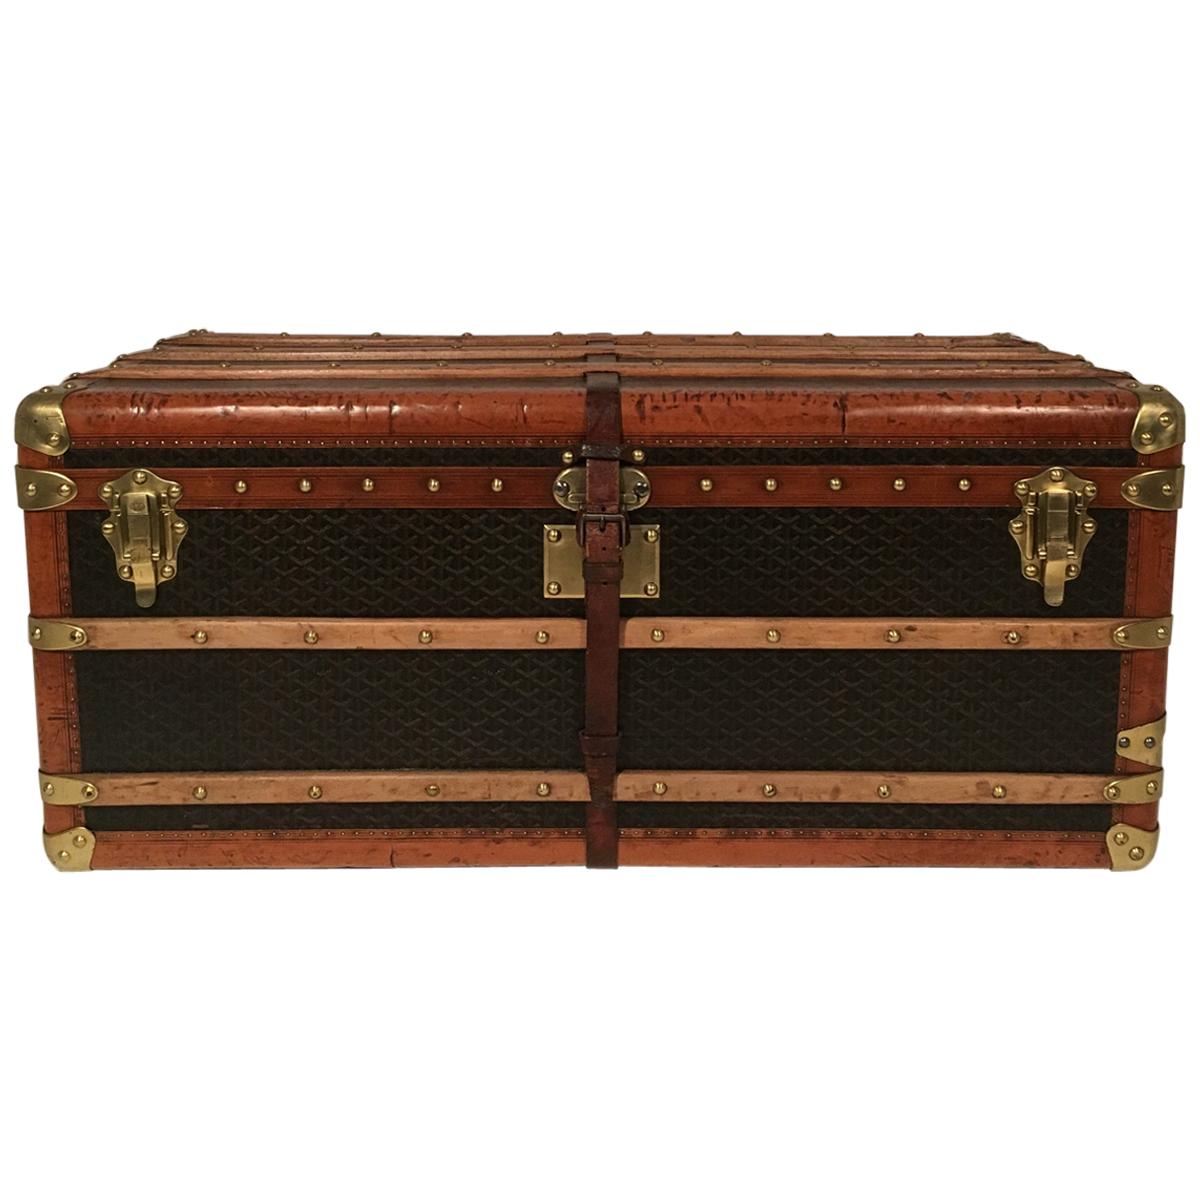 Goyard Steamer Trunk from the Princely House of Thurn and Taxis, France 1910s